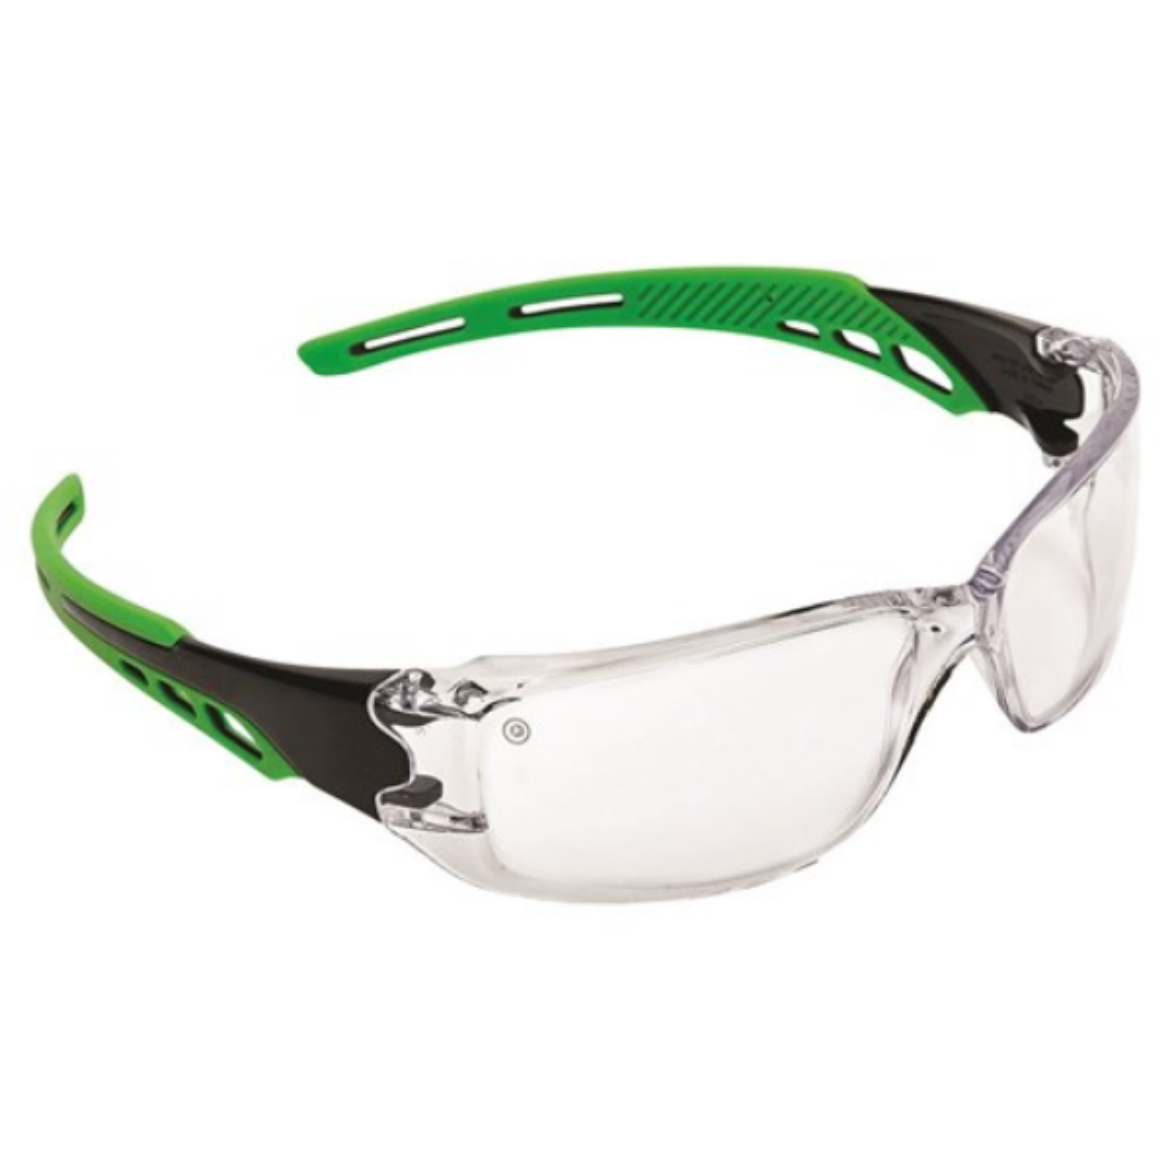 Picture of 9180 - CIRRUS - CLEAR LENS, ANTI-FOG, POLYCARBONATE FRAME GLASSES WITH SOFT GREEN ARMS